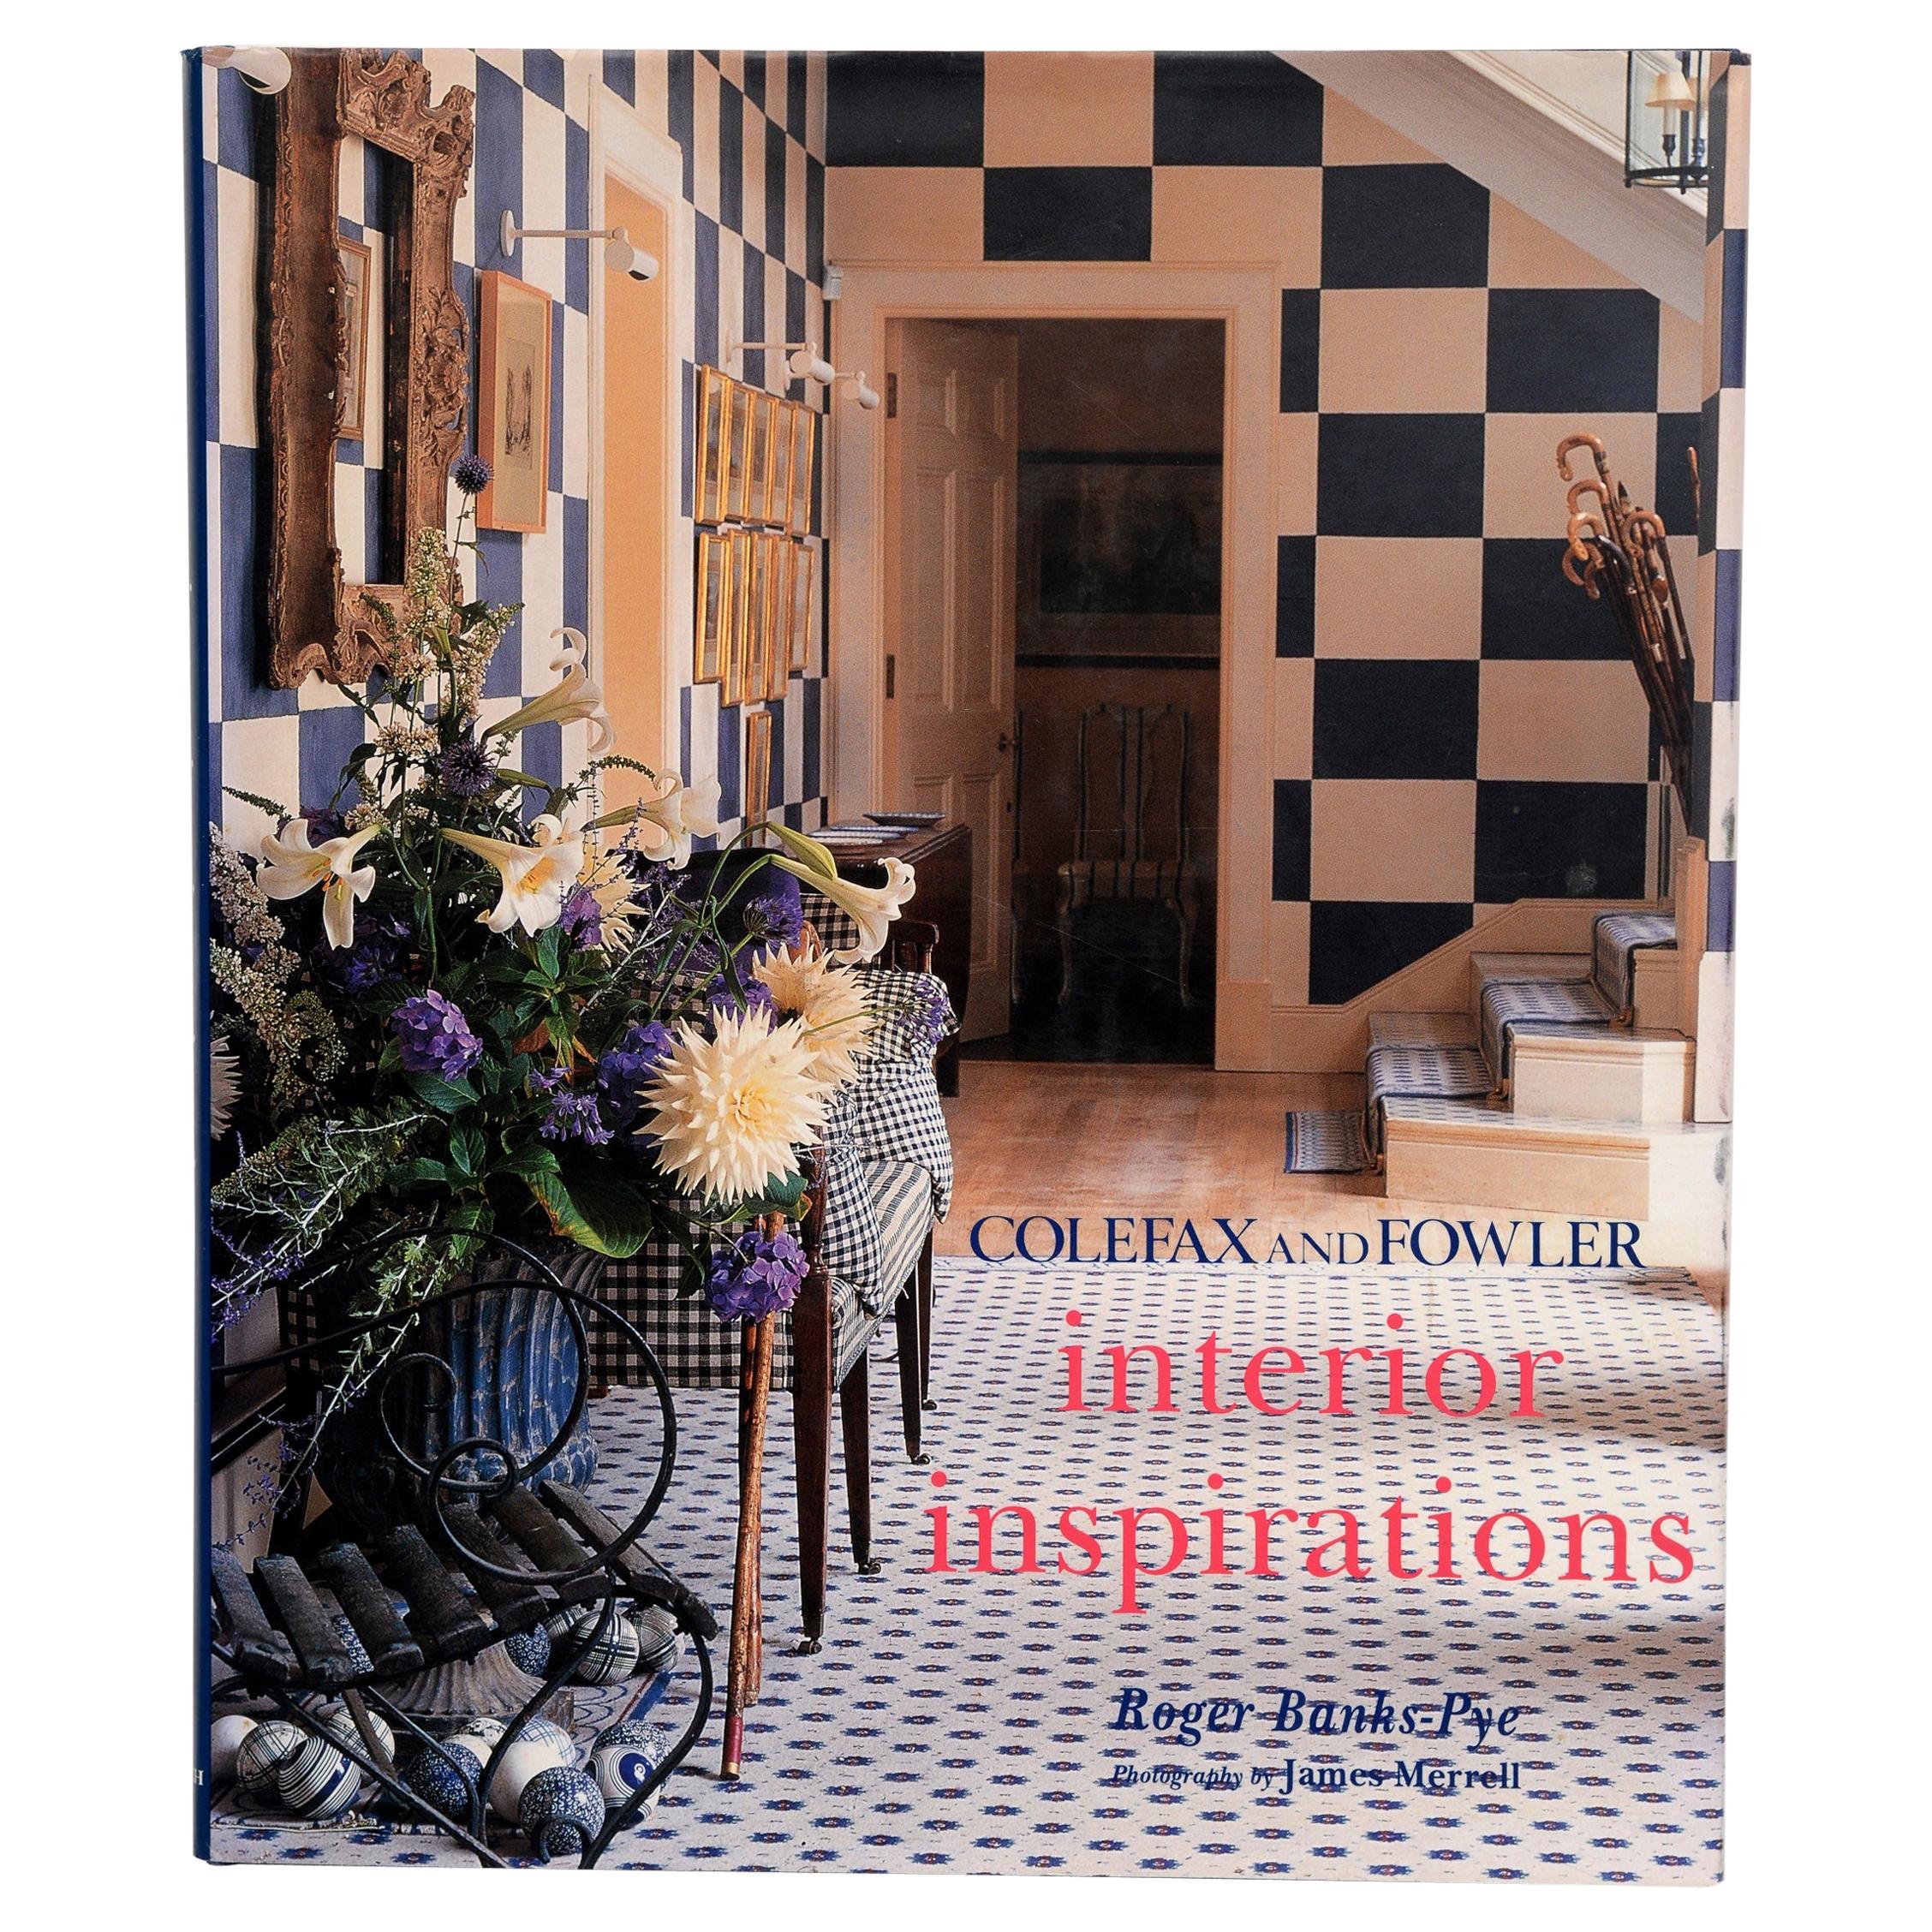 Colefax & Fowler's Interior Inspirations by Roger Banks-Pye, First Edition